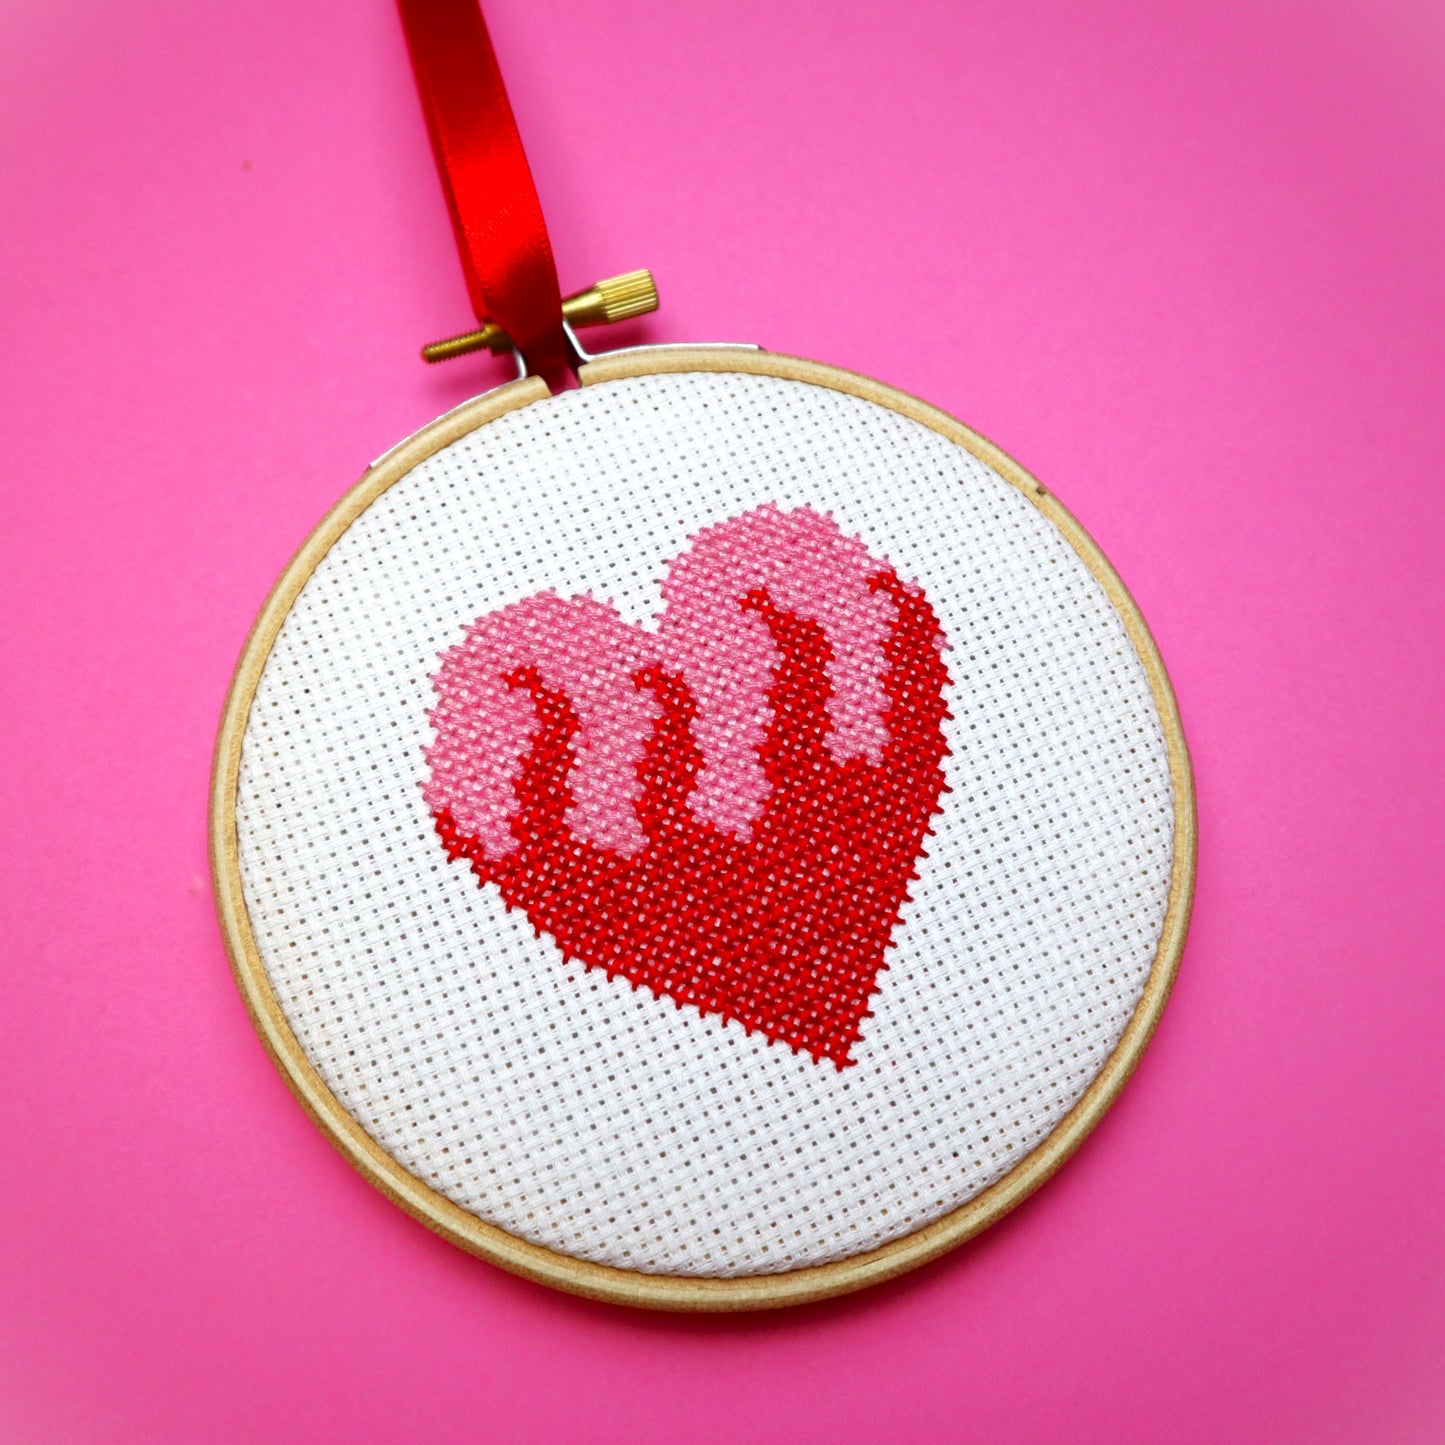 Red Flaming Heart Cross Stitch Kit